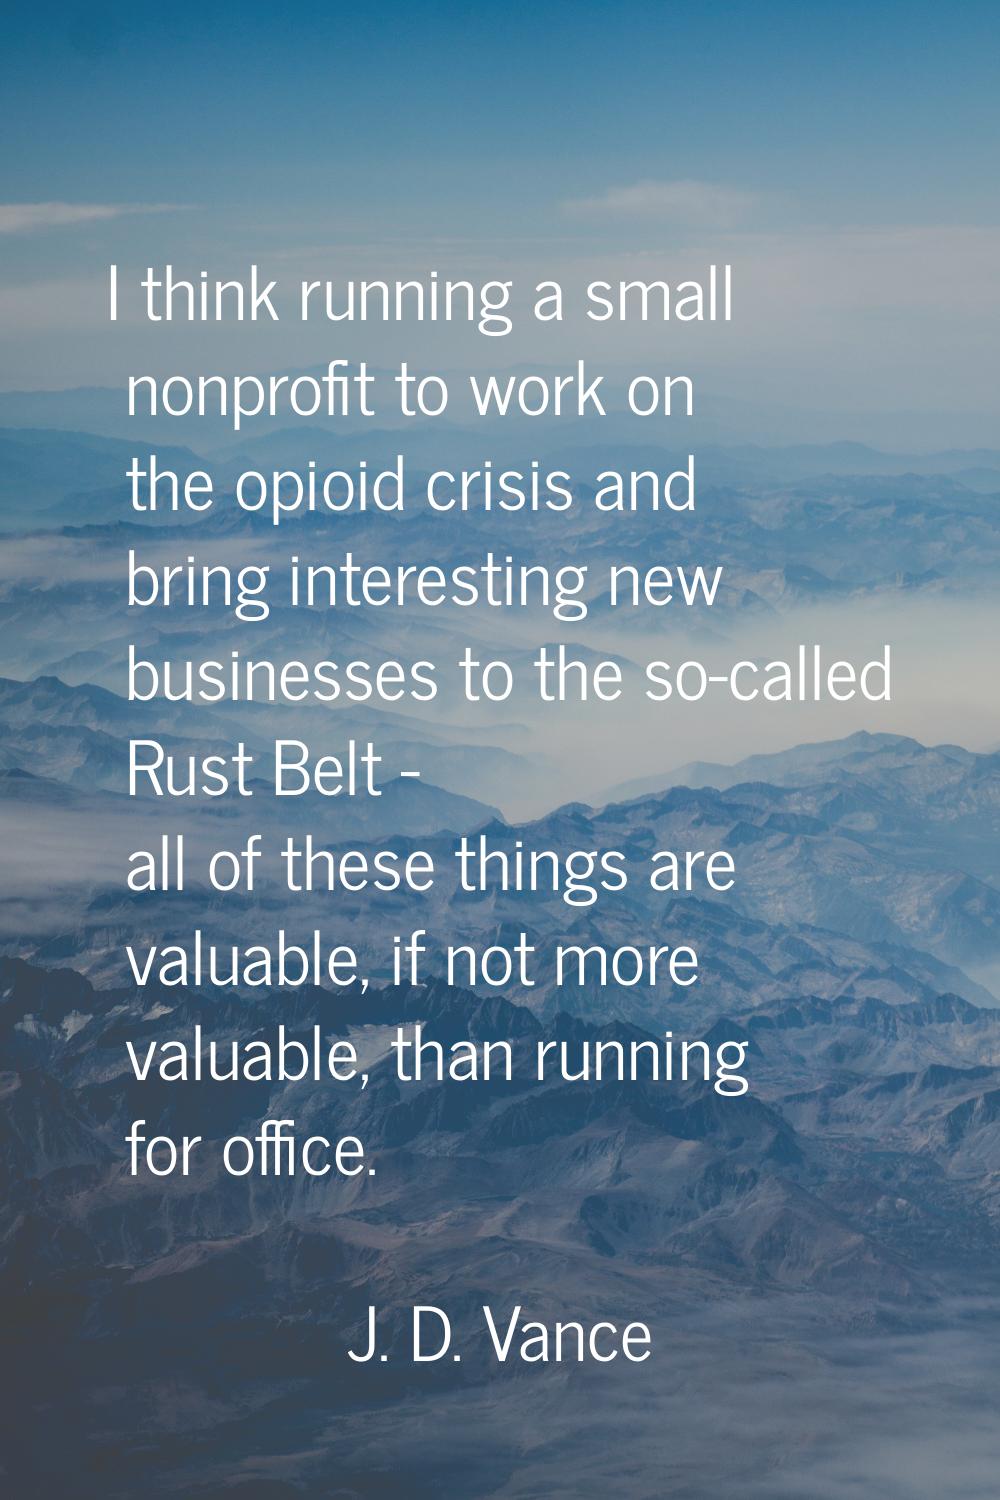 I think running a small nonprofit to work on the opioid crisis and bring interesting new businesses